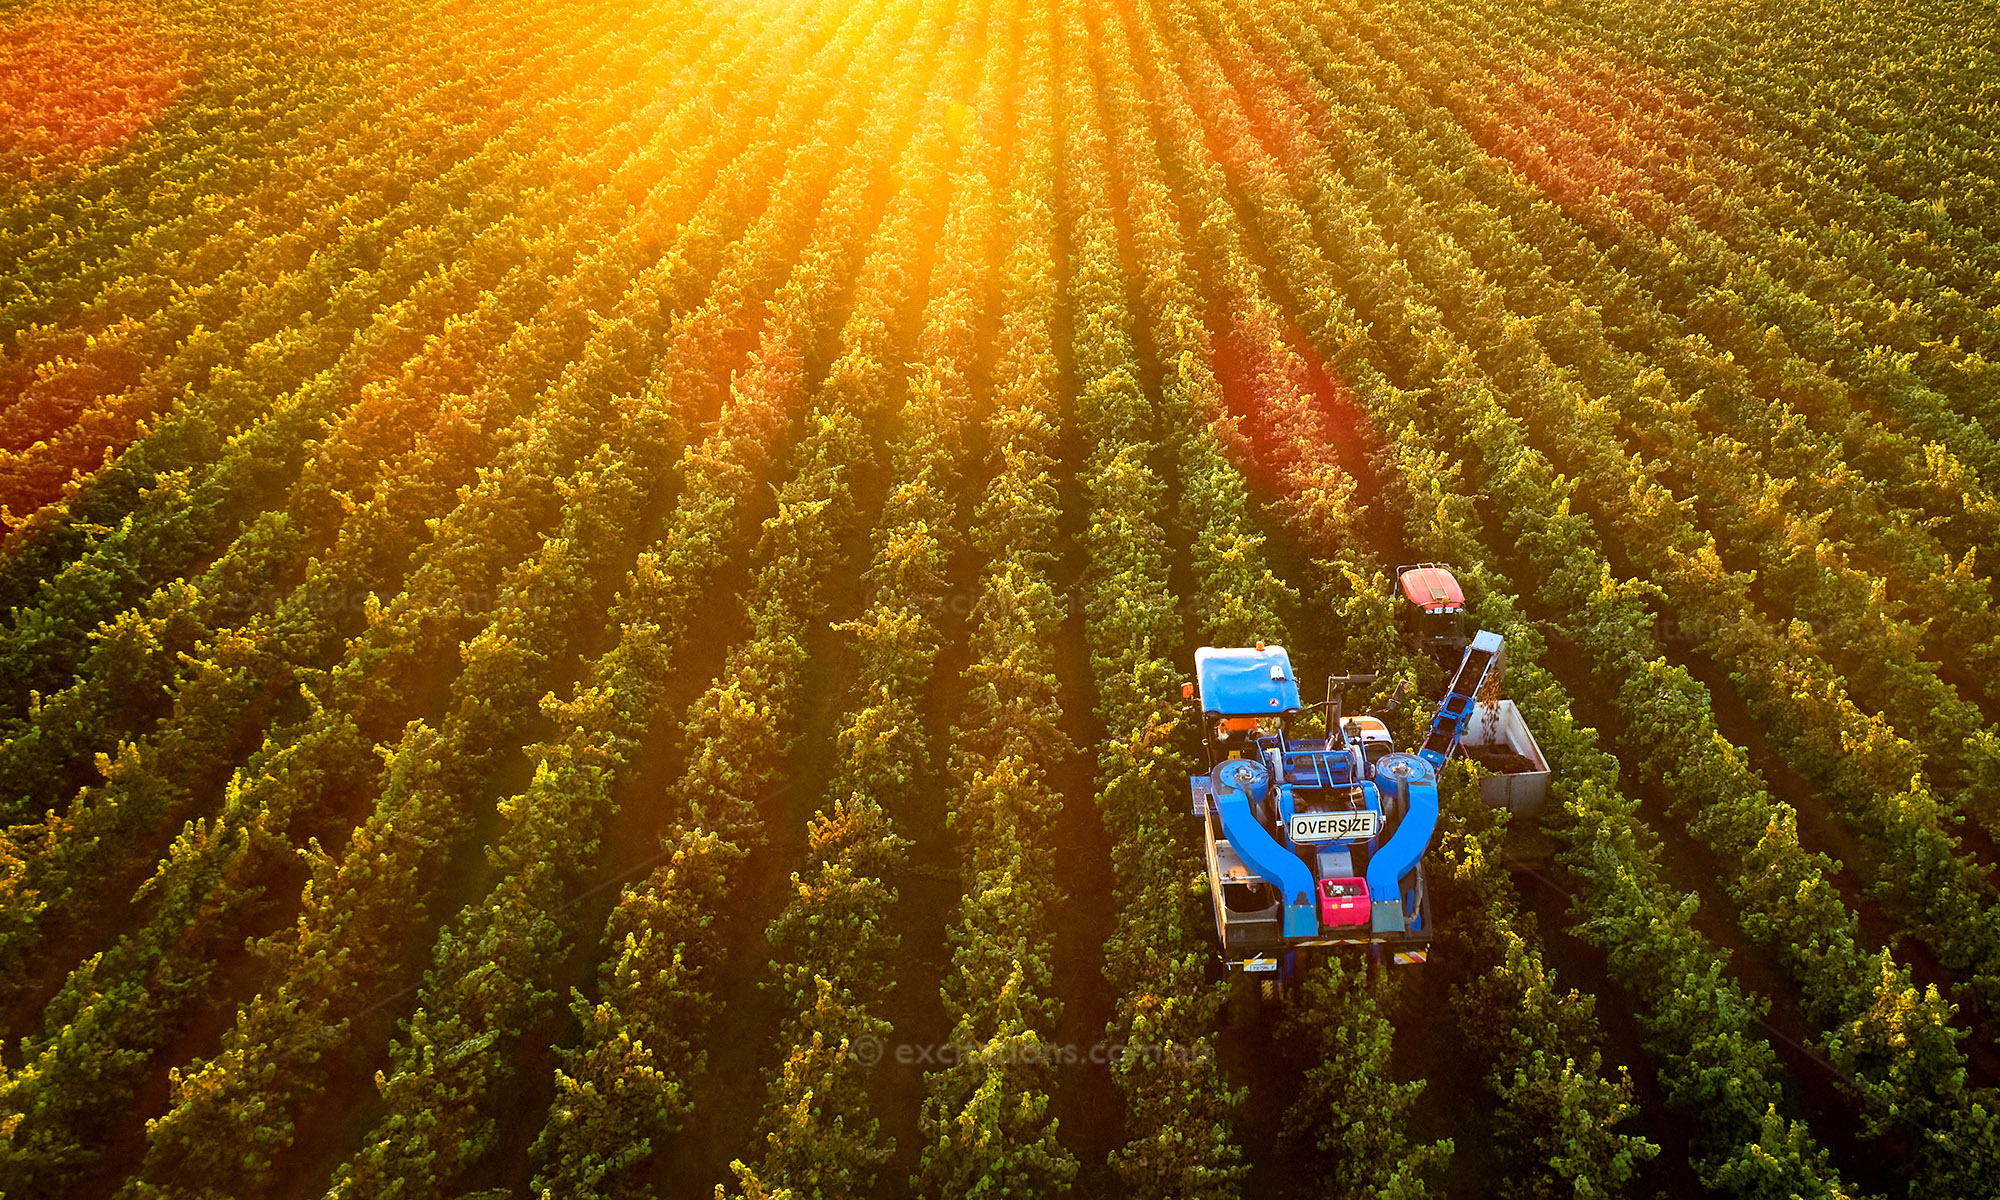 Stock Photos of Australia, aerial photo of grape harvester working in vineyard with setting sun flare.